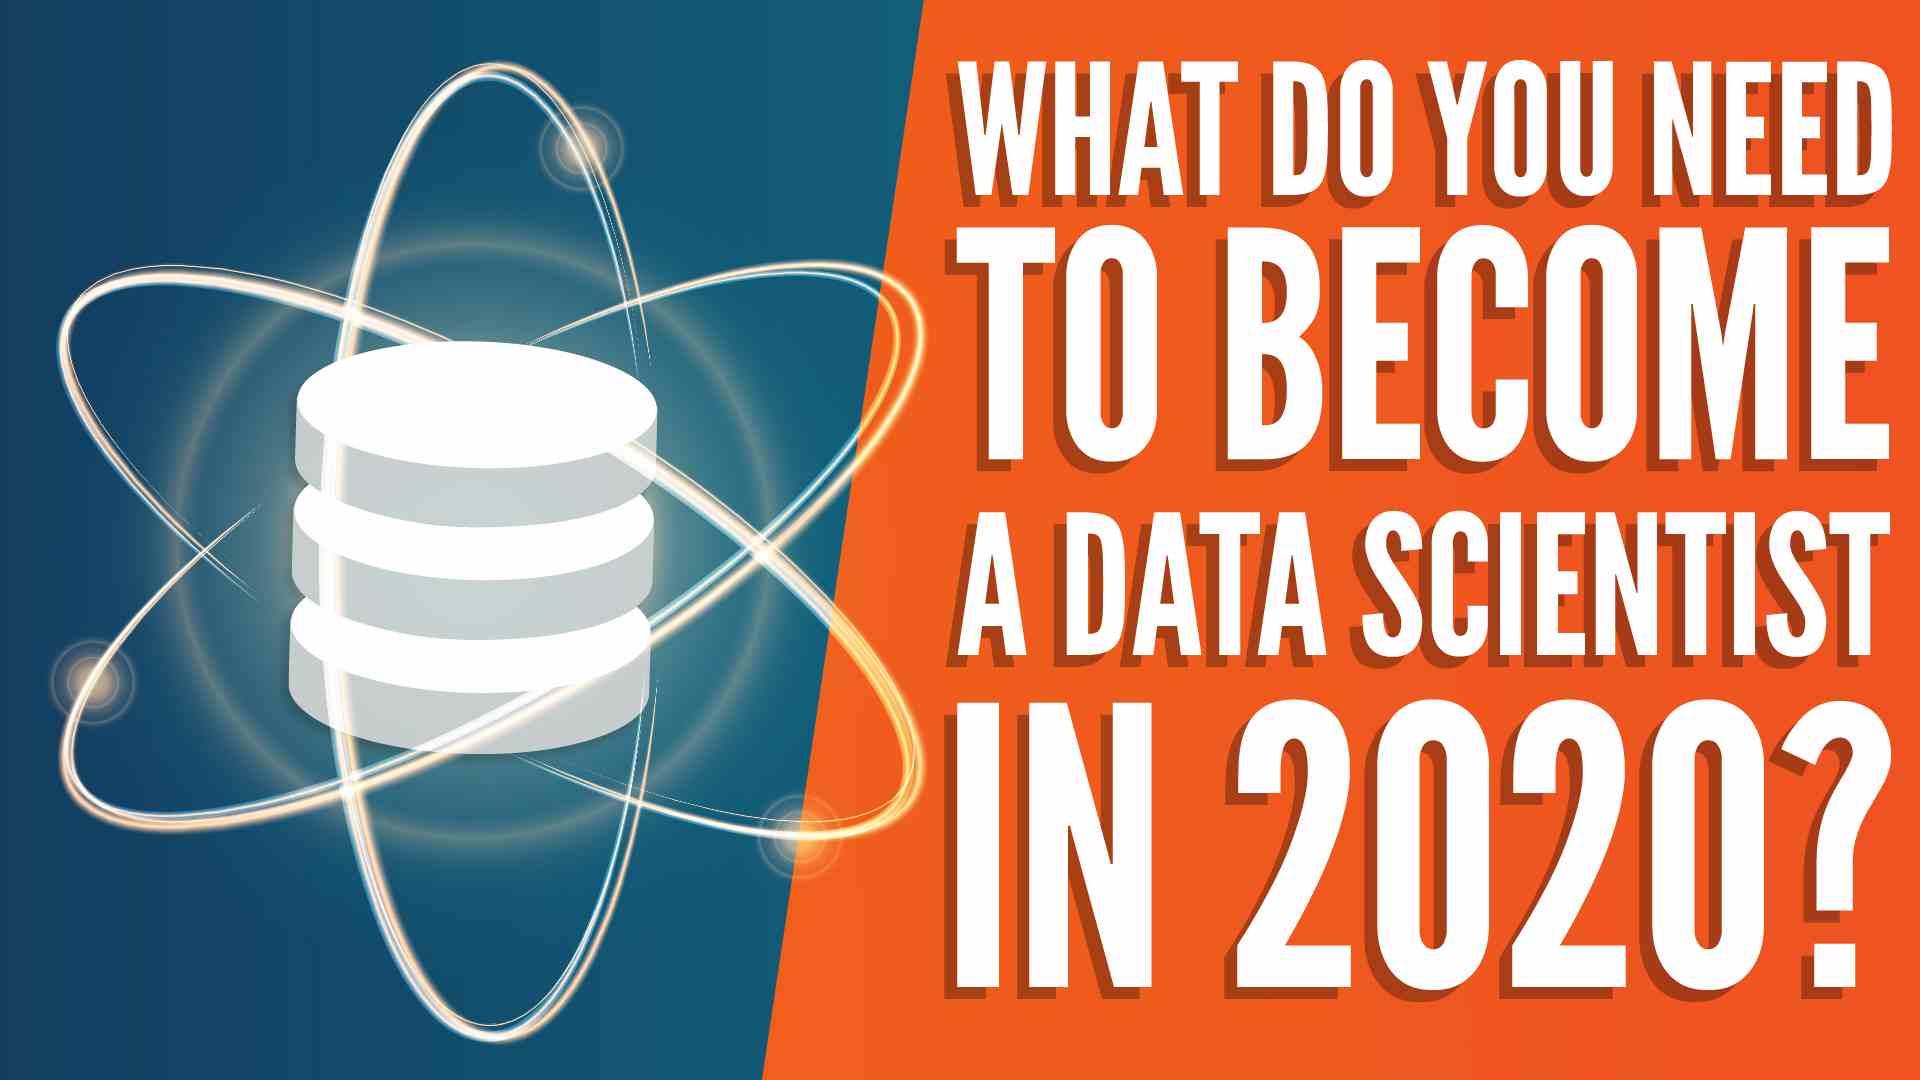 How to Become a Data Scientist in 2020 – Top Skills, Education, and Experience